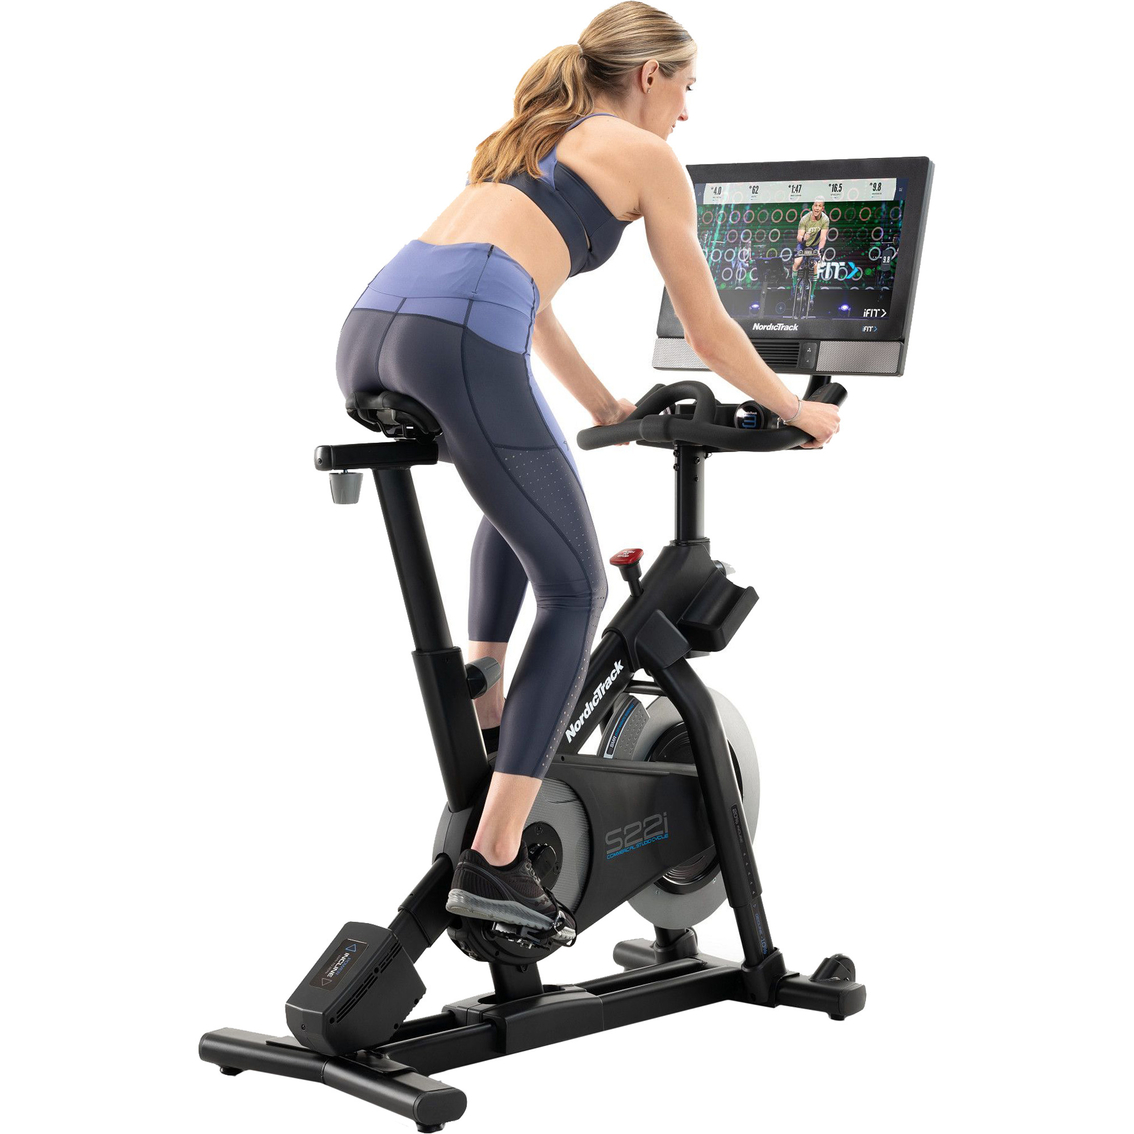 NordicTrack Commercial S22i Exercise Bike - Image 5 of 5